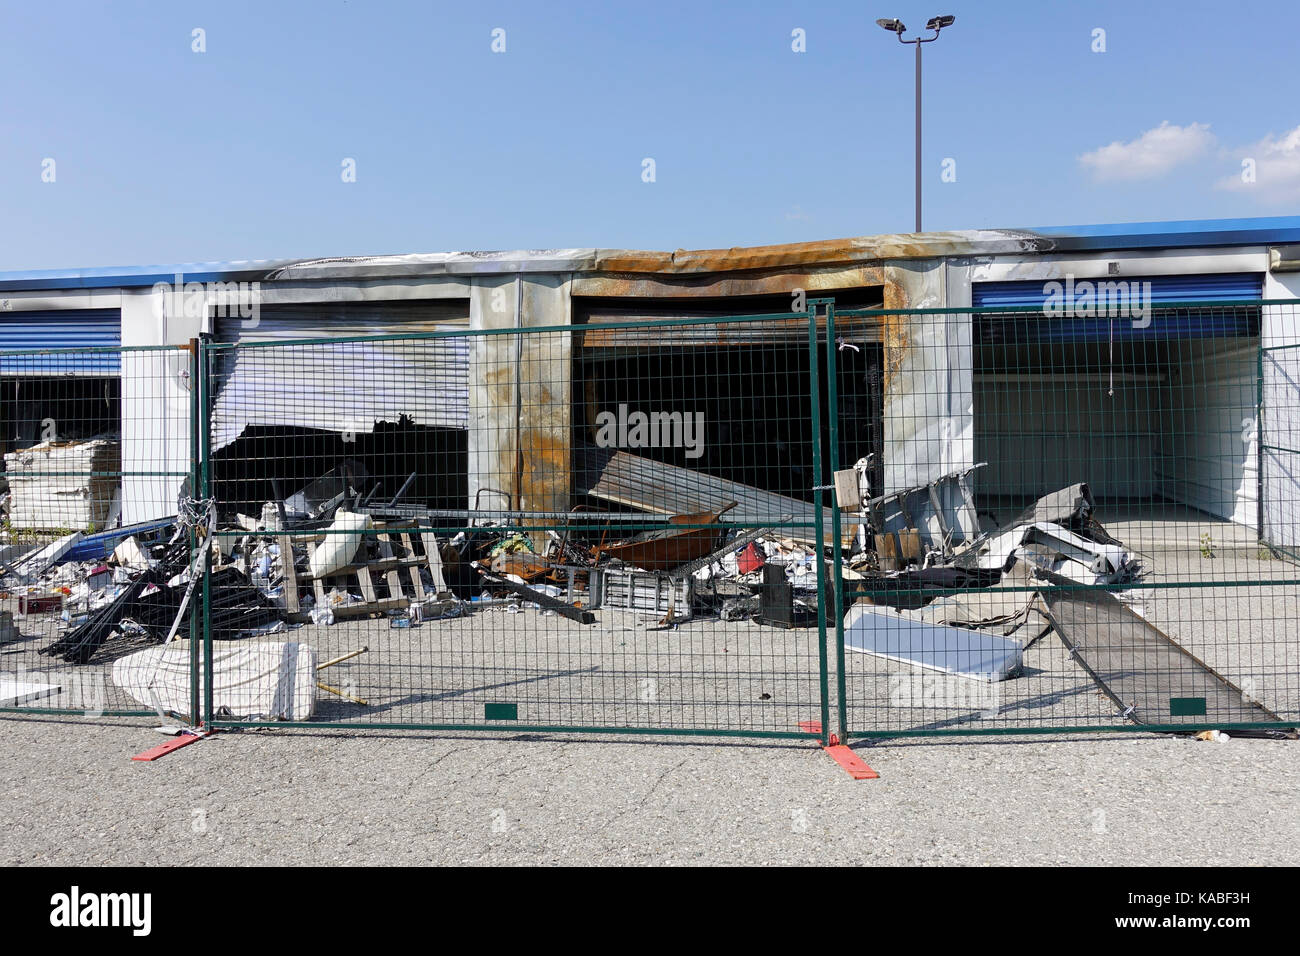 The Exterior Of An American Self Storage Unit Facility Destroyed By Fire Stock Photo